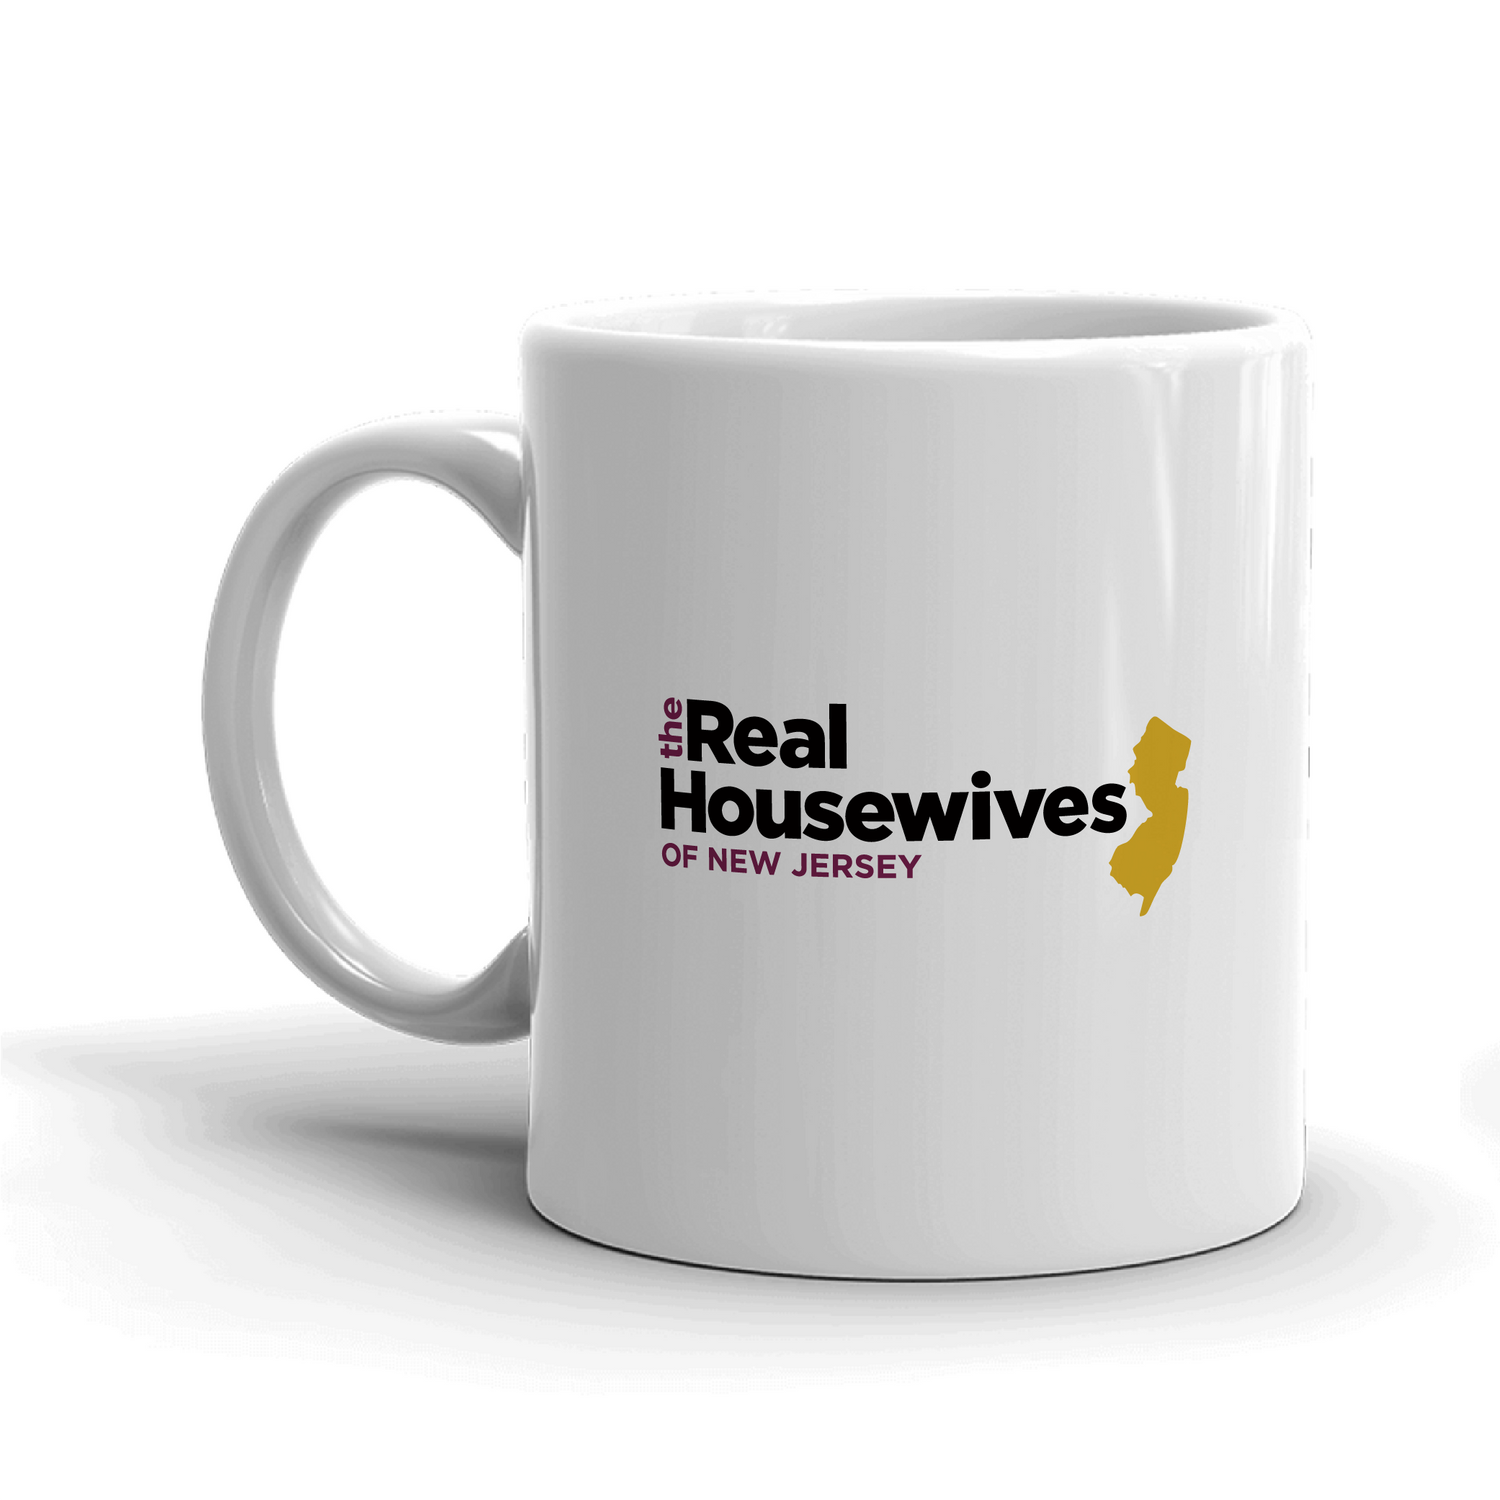 The Real Housewives of New Jersey Jackie Goldschneider Season 12 Tagline White Mug